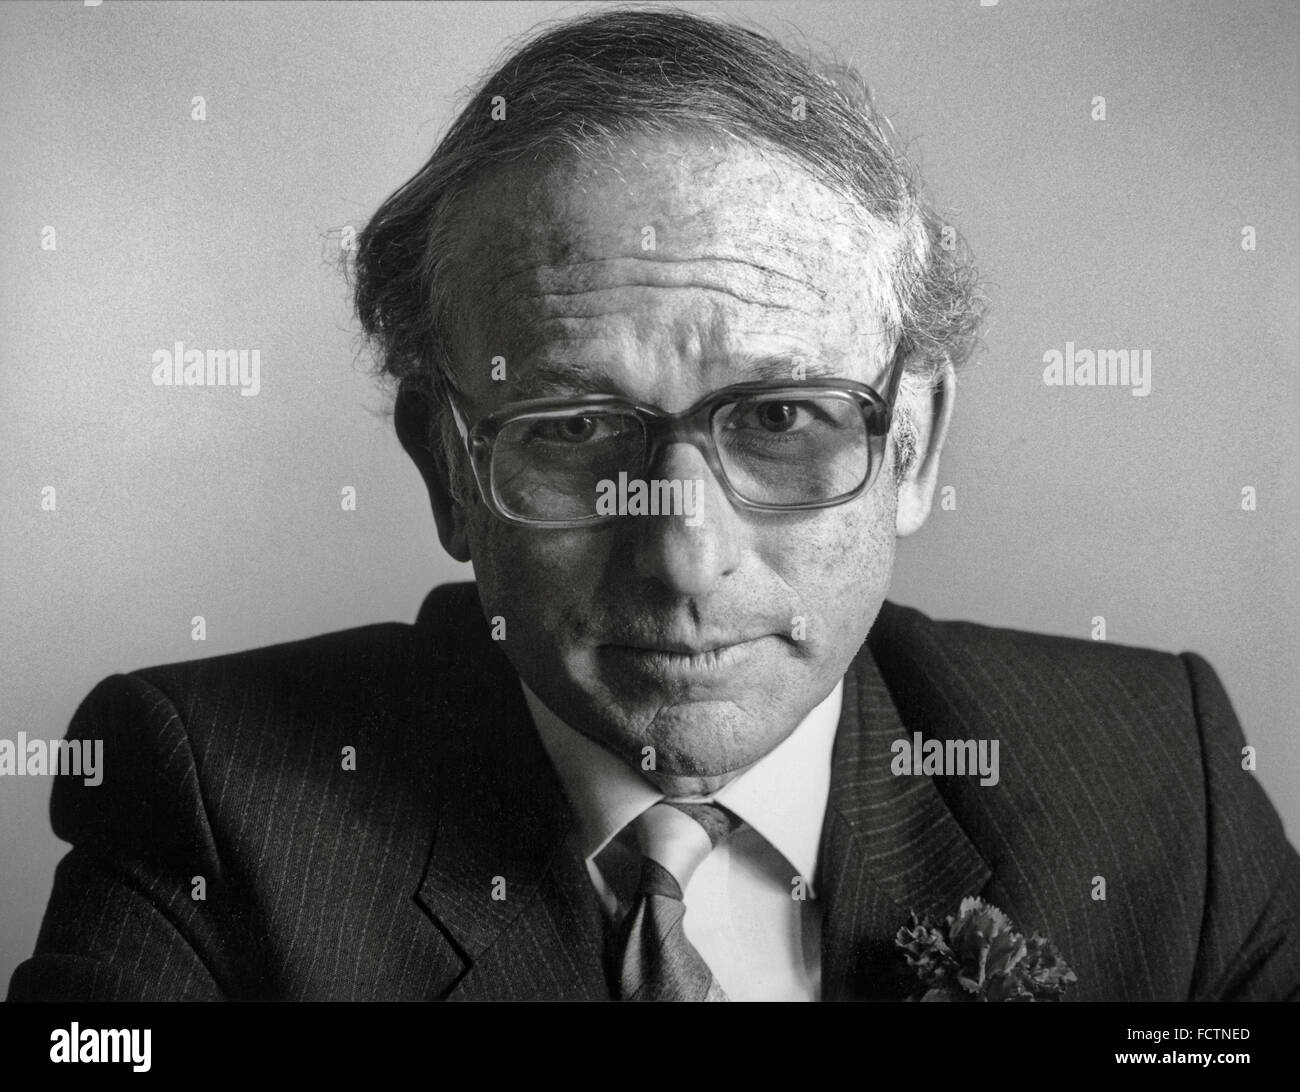 Greville Ewan Janner, Baron Janner of Braunstone, QC was a British politician, barrister and writer. Stock Photo